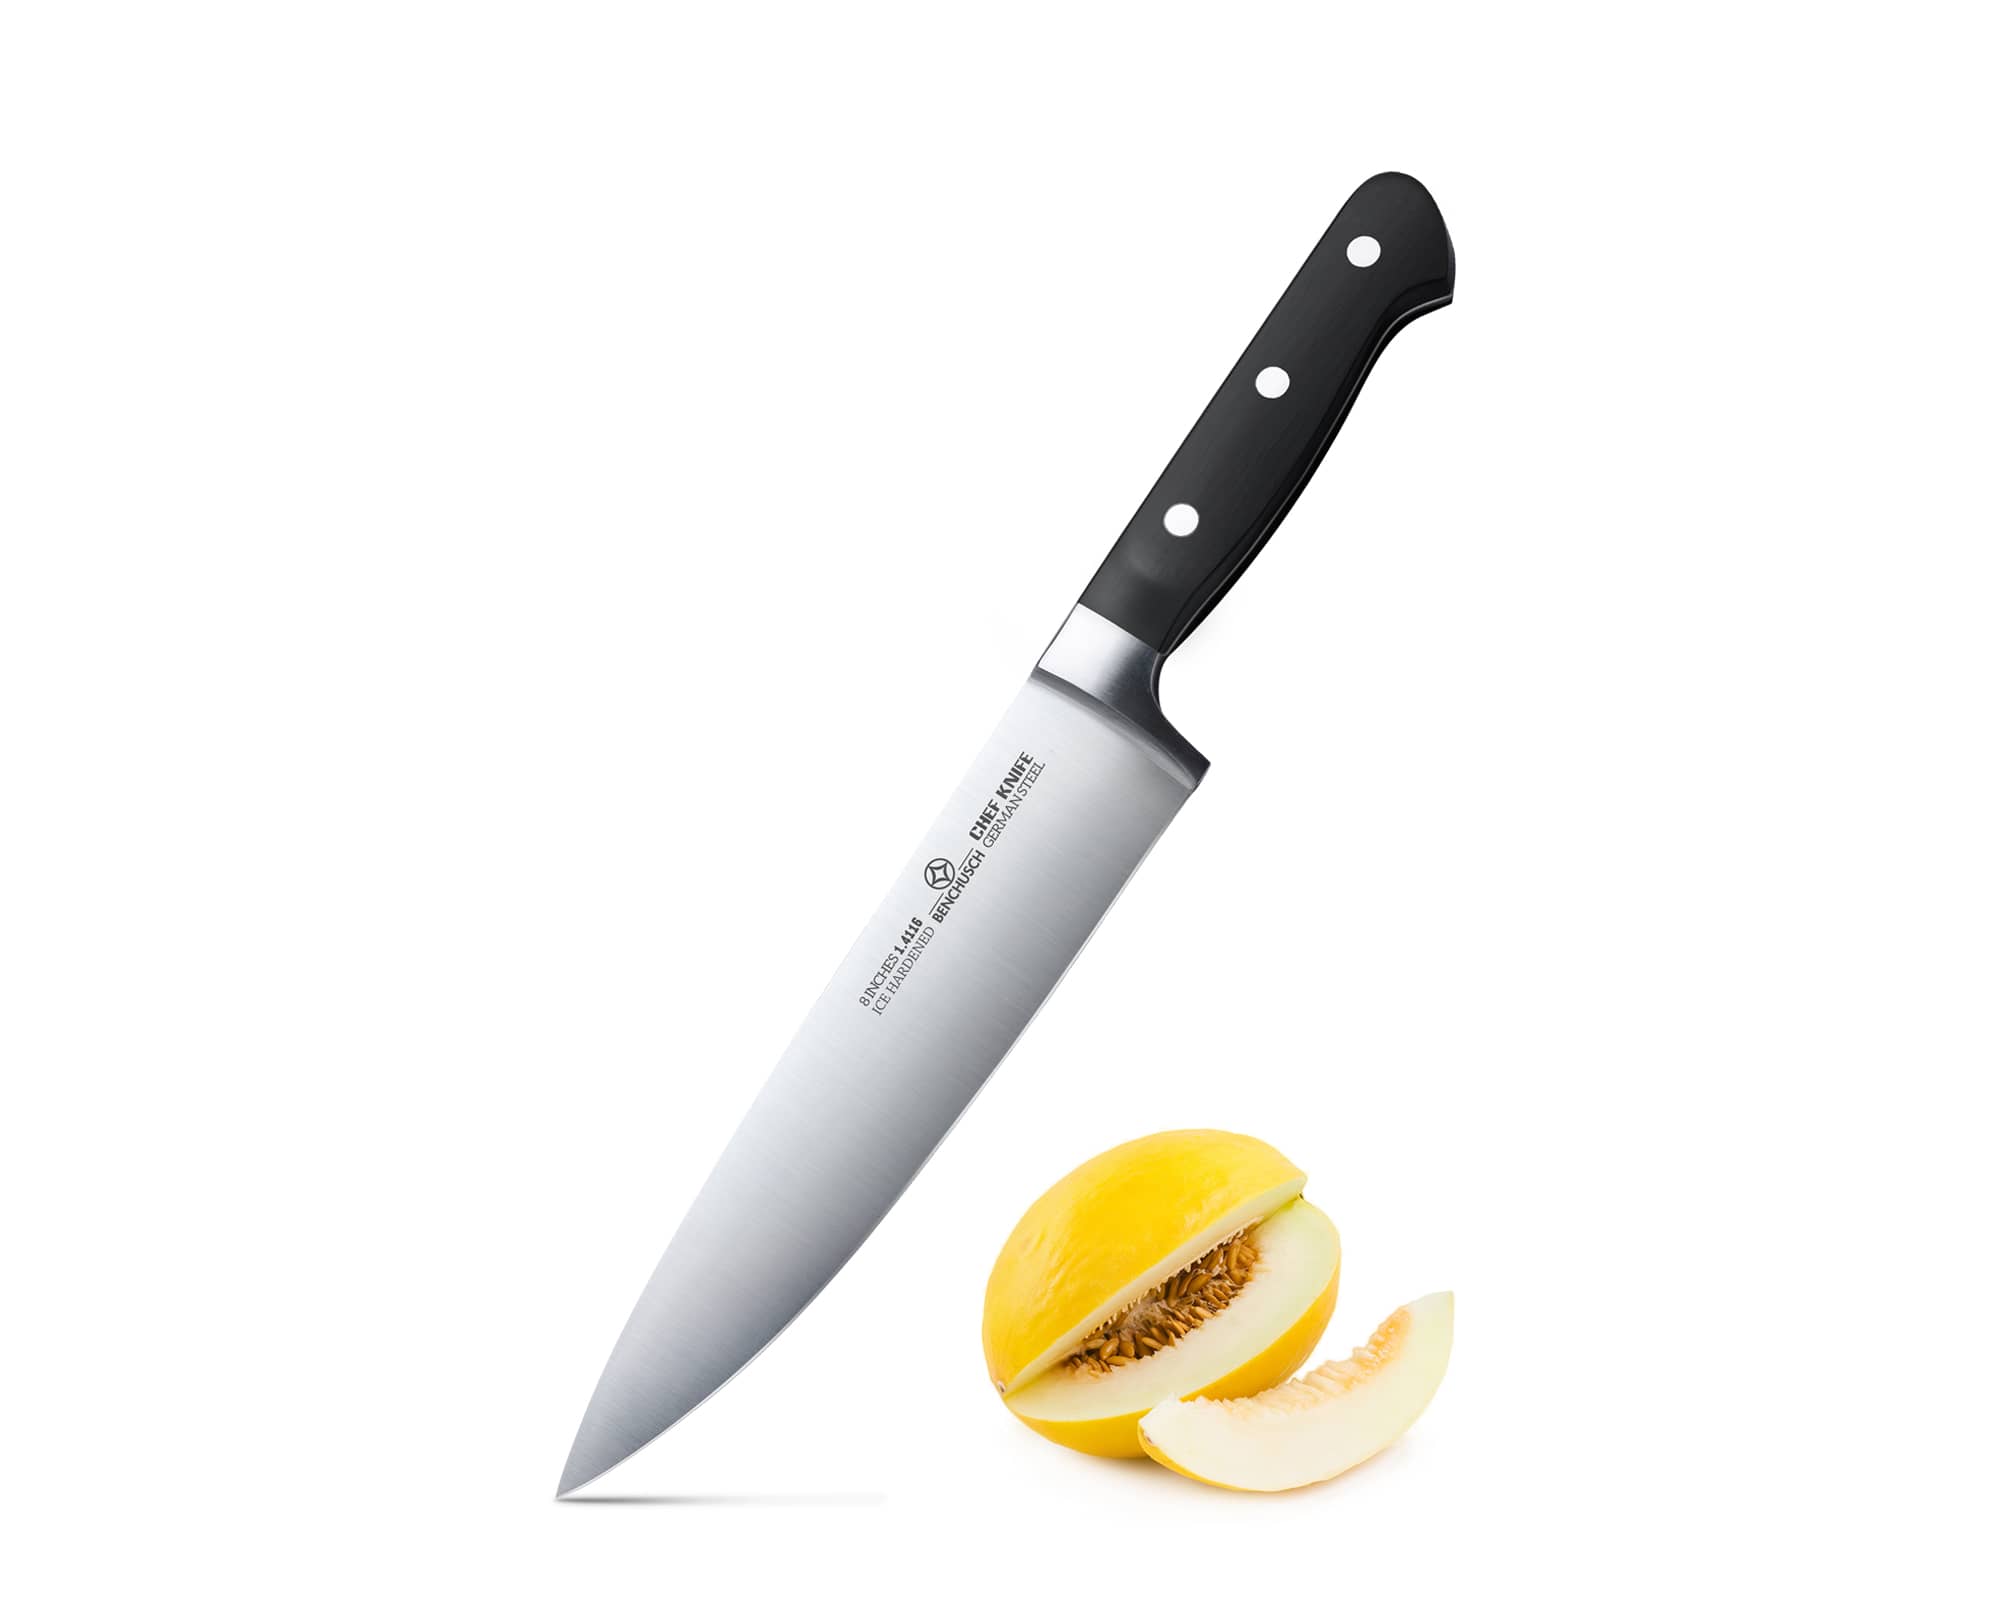 Benchusch Professional 8-Inch Chef Knife - Classic Series - German HC Steel with Full Tang Blade - Multi-Use for Slicing, Dicing, Chopping and Mincing Meat, Fish, Fruits, Vegetables